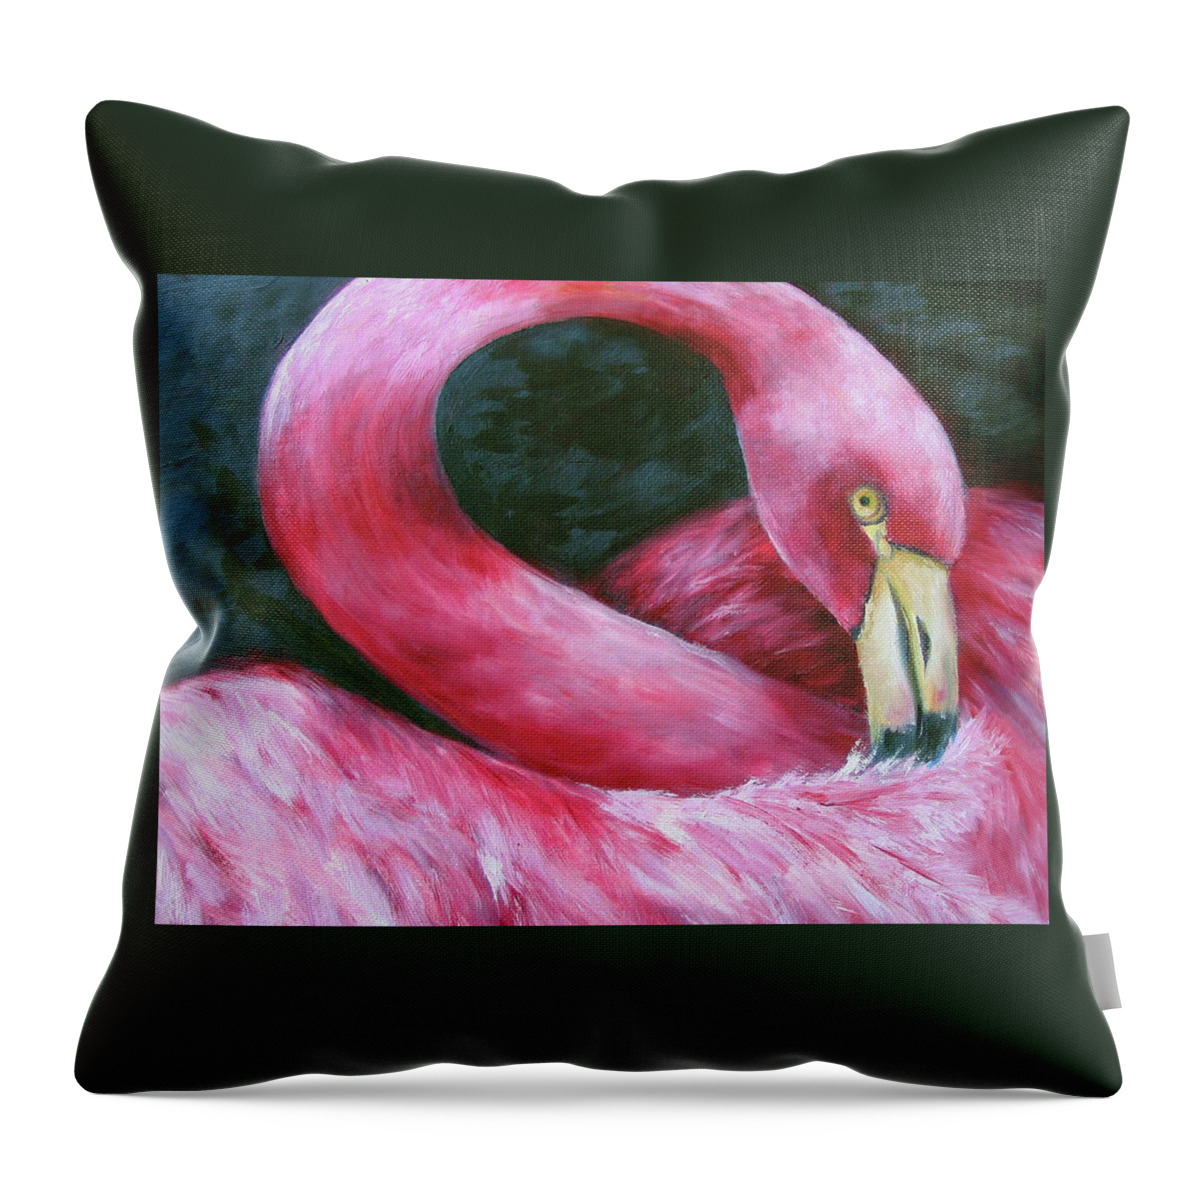 Glance Of The Flamingo Is A Reproduction Of The Artist's Tropical Work. A Bold And Dramatic Presentation. Throw Pillow featuring the painting Glance of the Flamingo by Barbara Landry